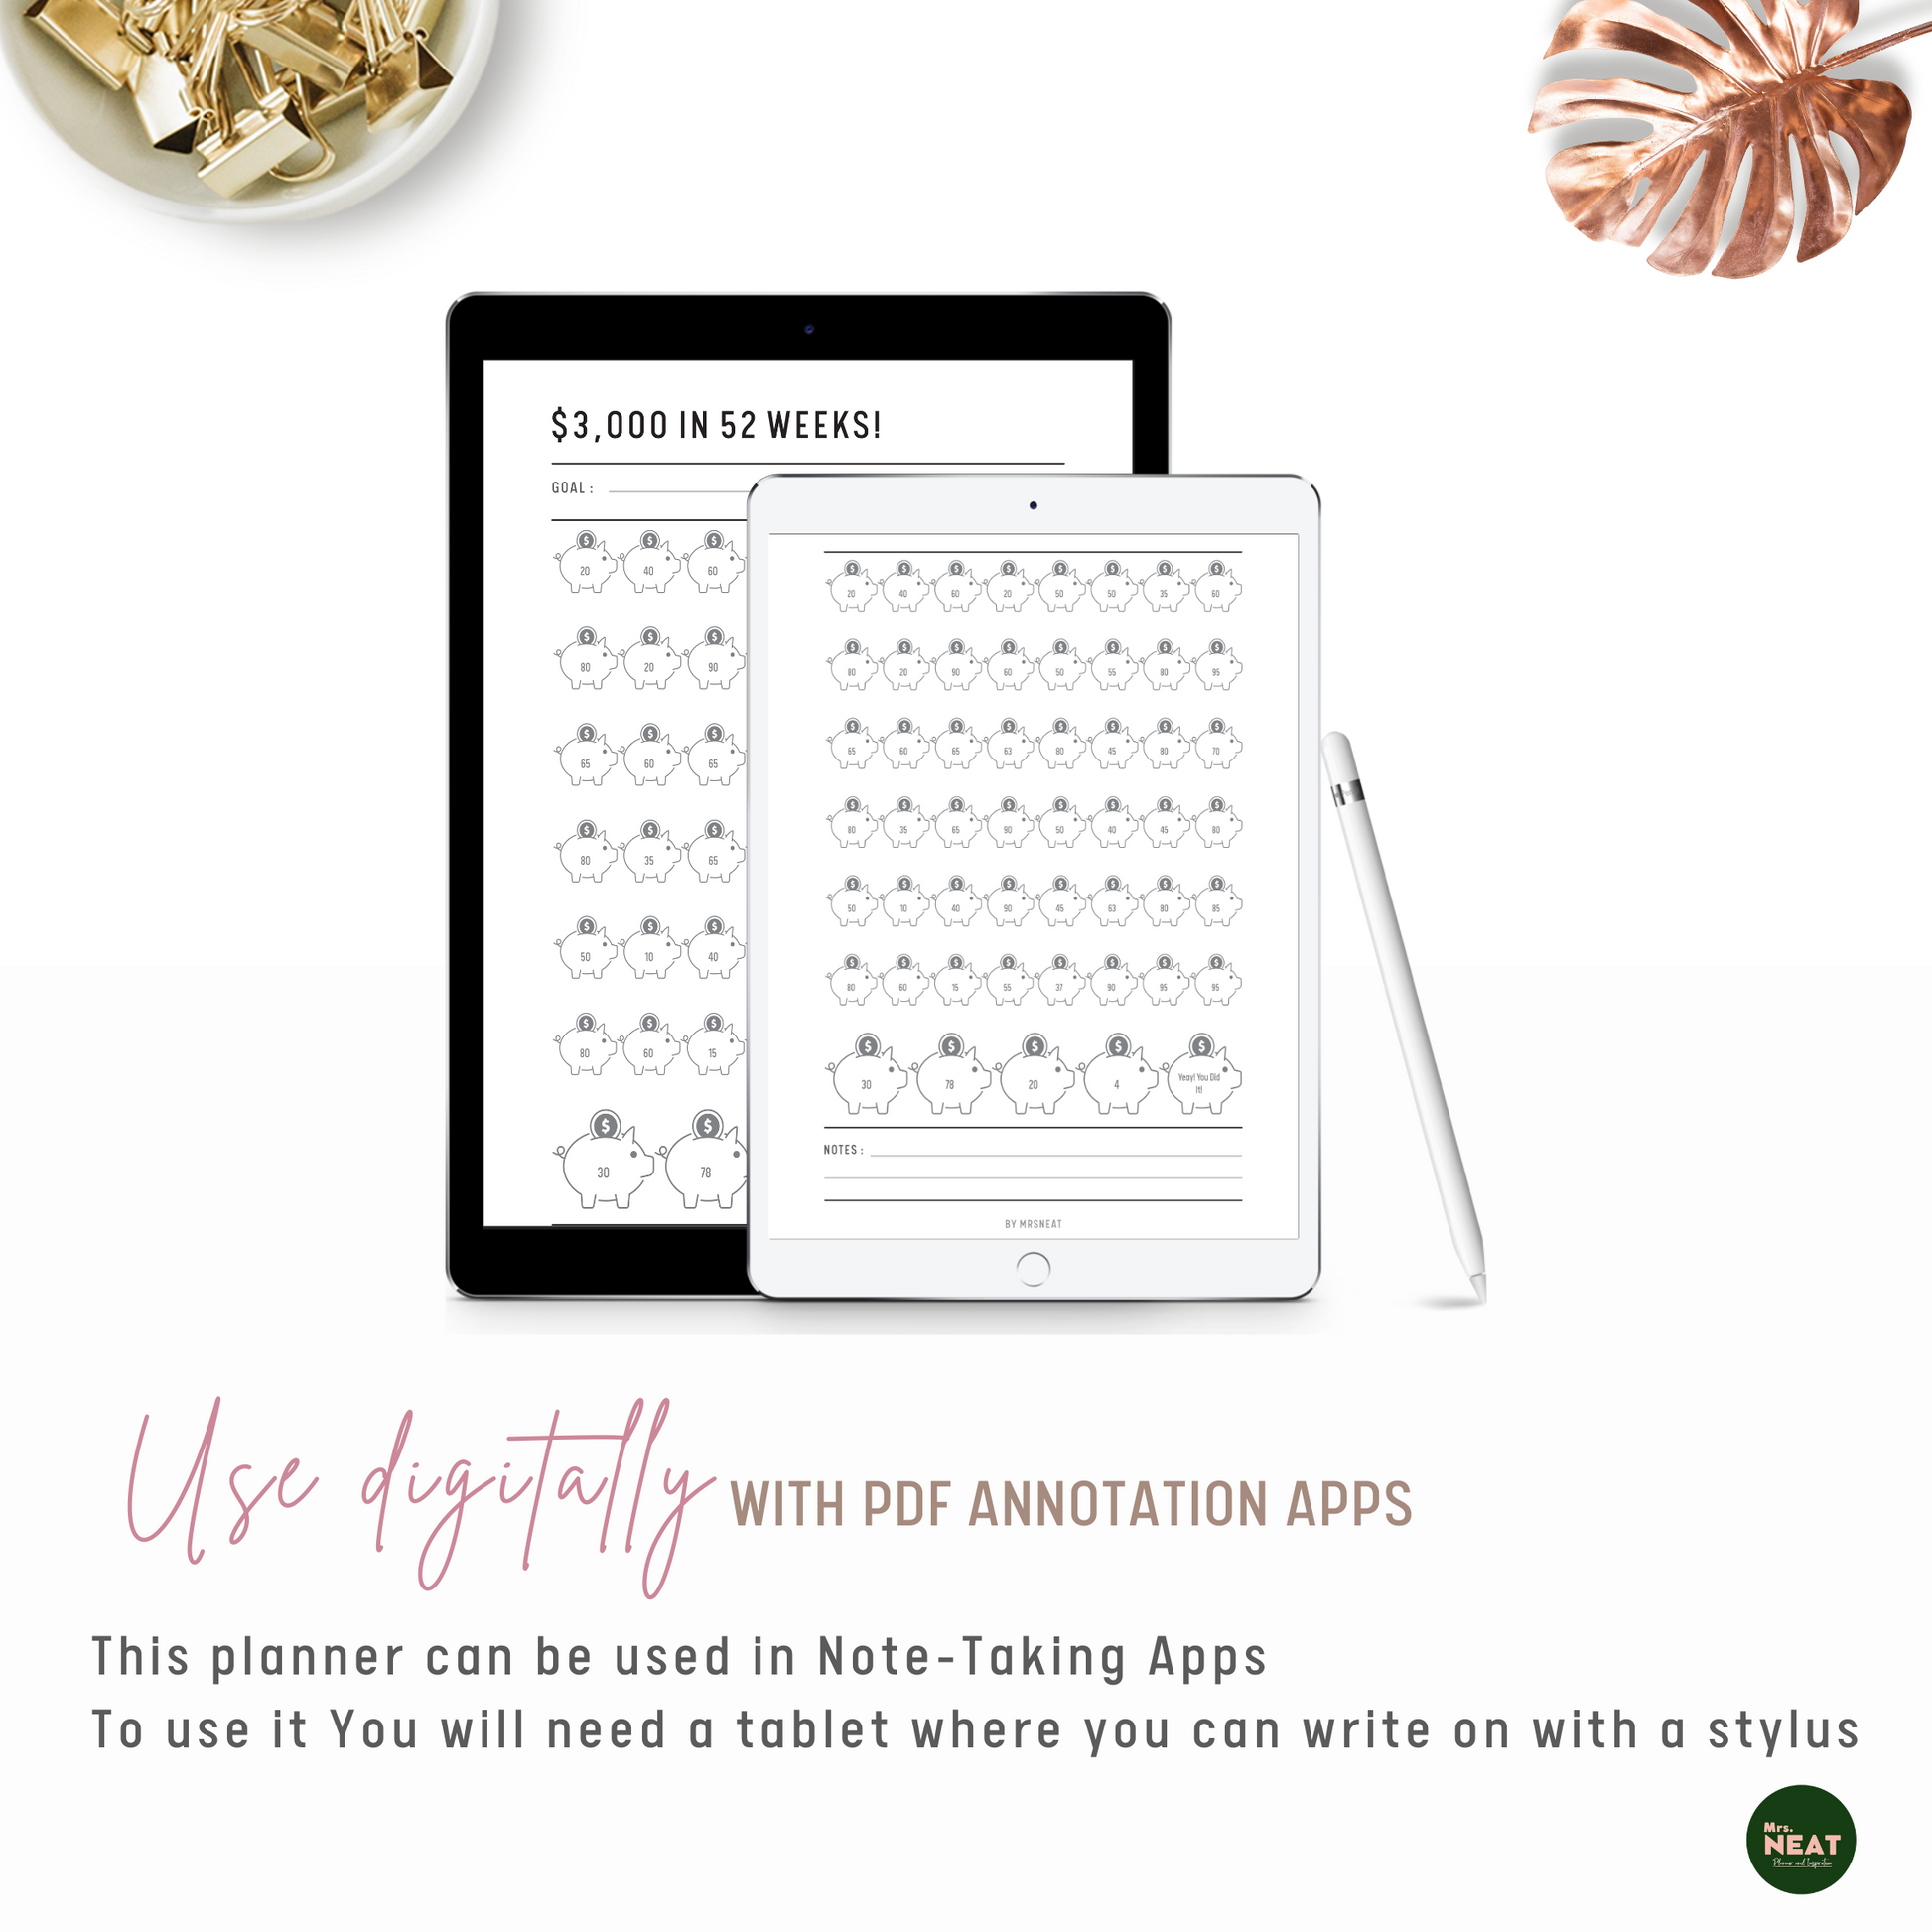 Cute Piggy bank saving challenge planner that saved money $3000 in 52 weeks can be use digitally with PDF Annotation Apps